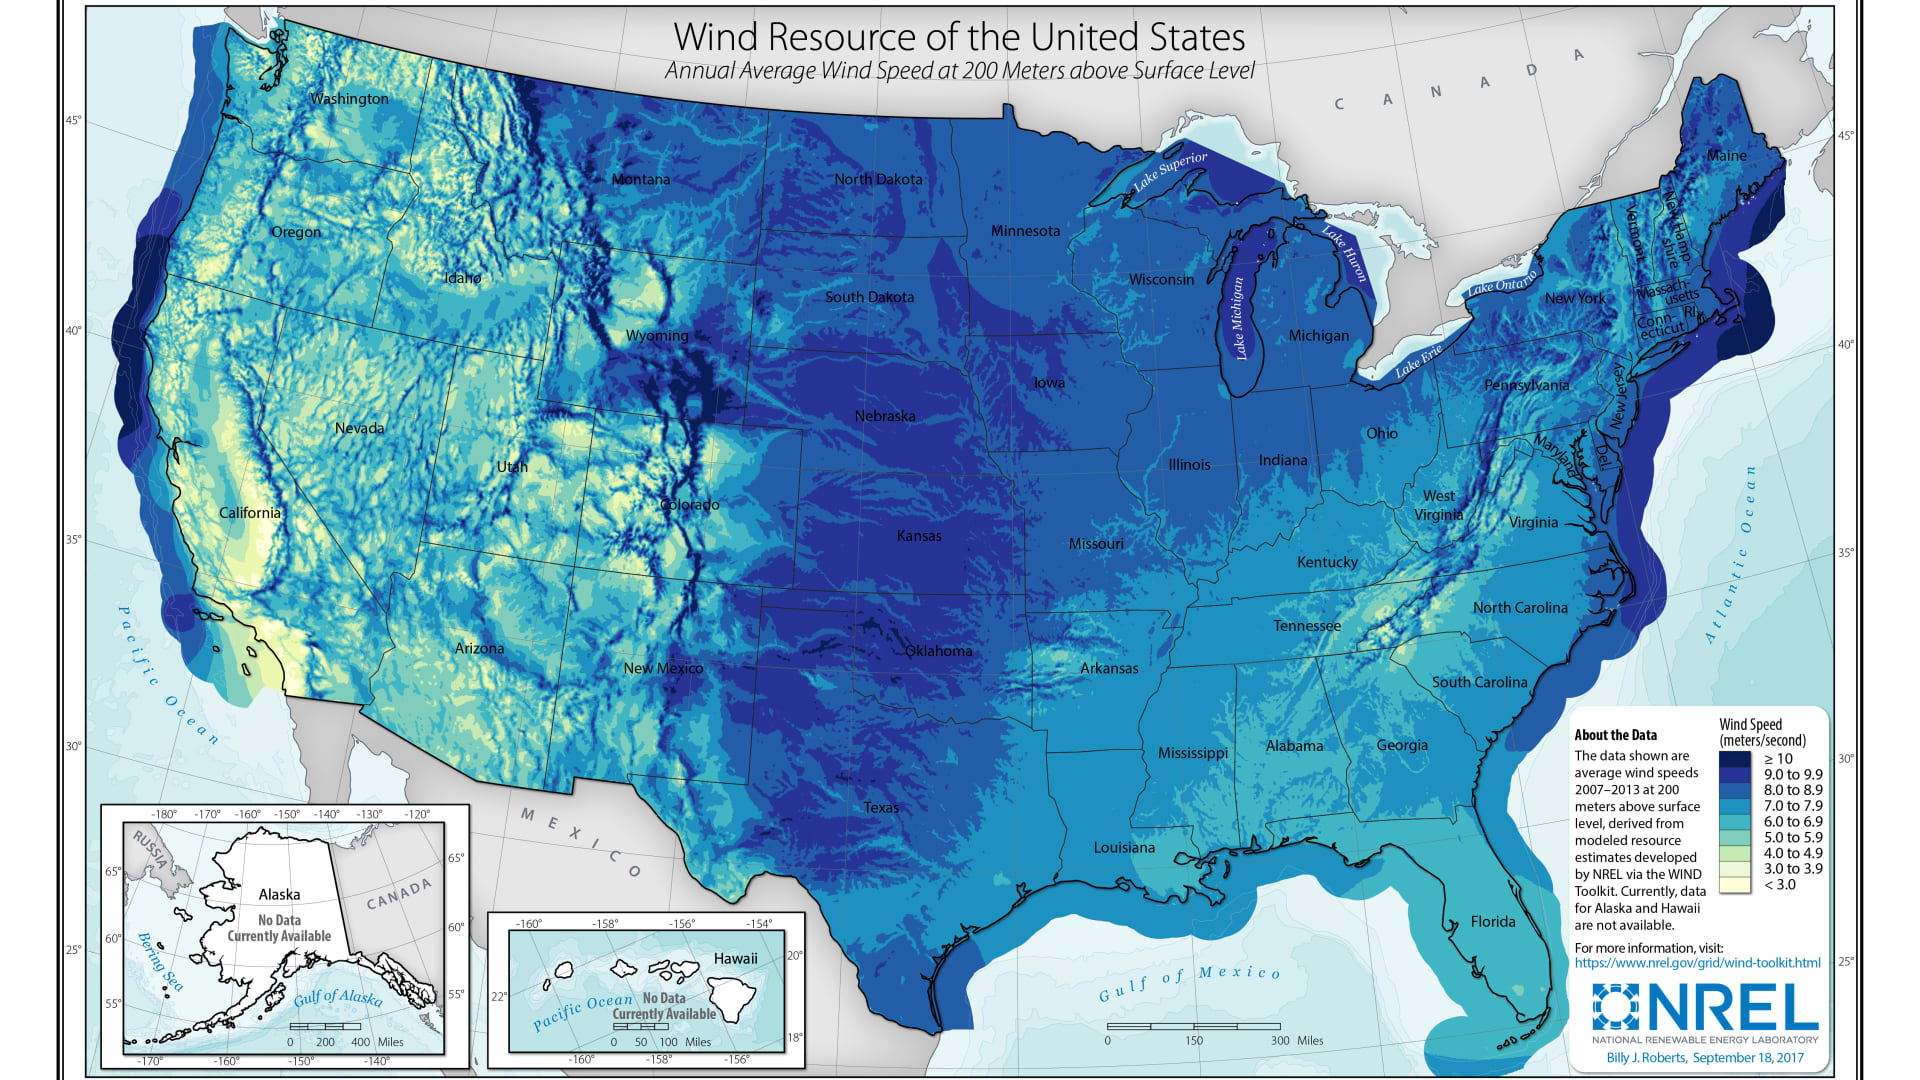 Wind resources in the United States, according to the the National Renewable Energy Laboratory, a national laboratory of the U.S. Department of Energy.